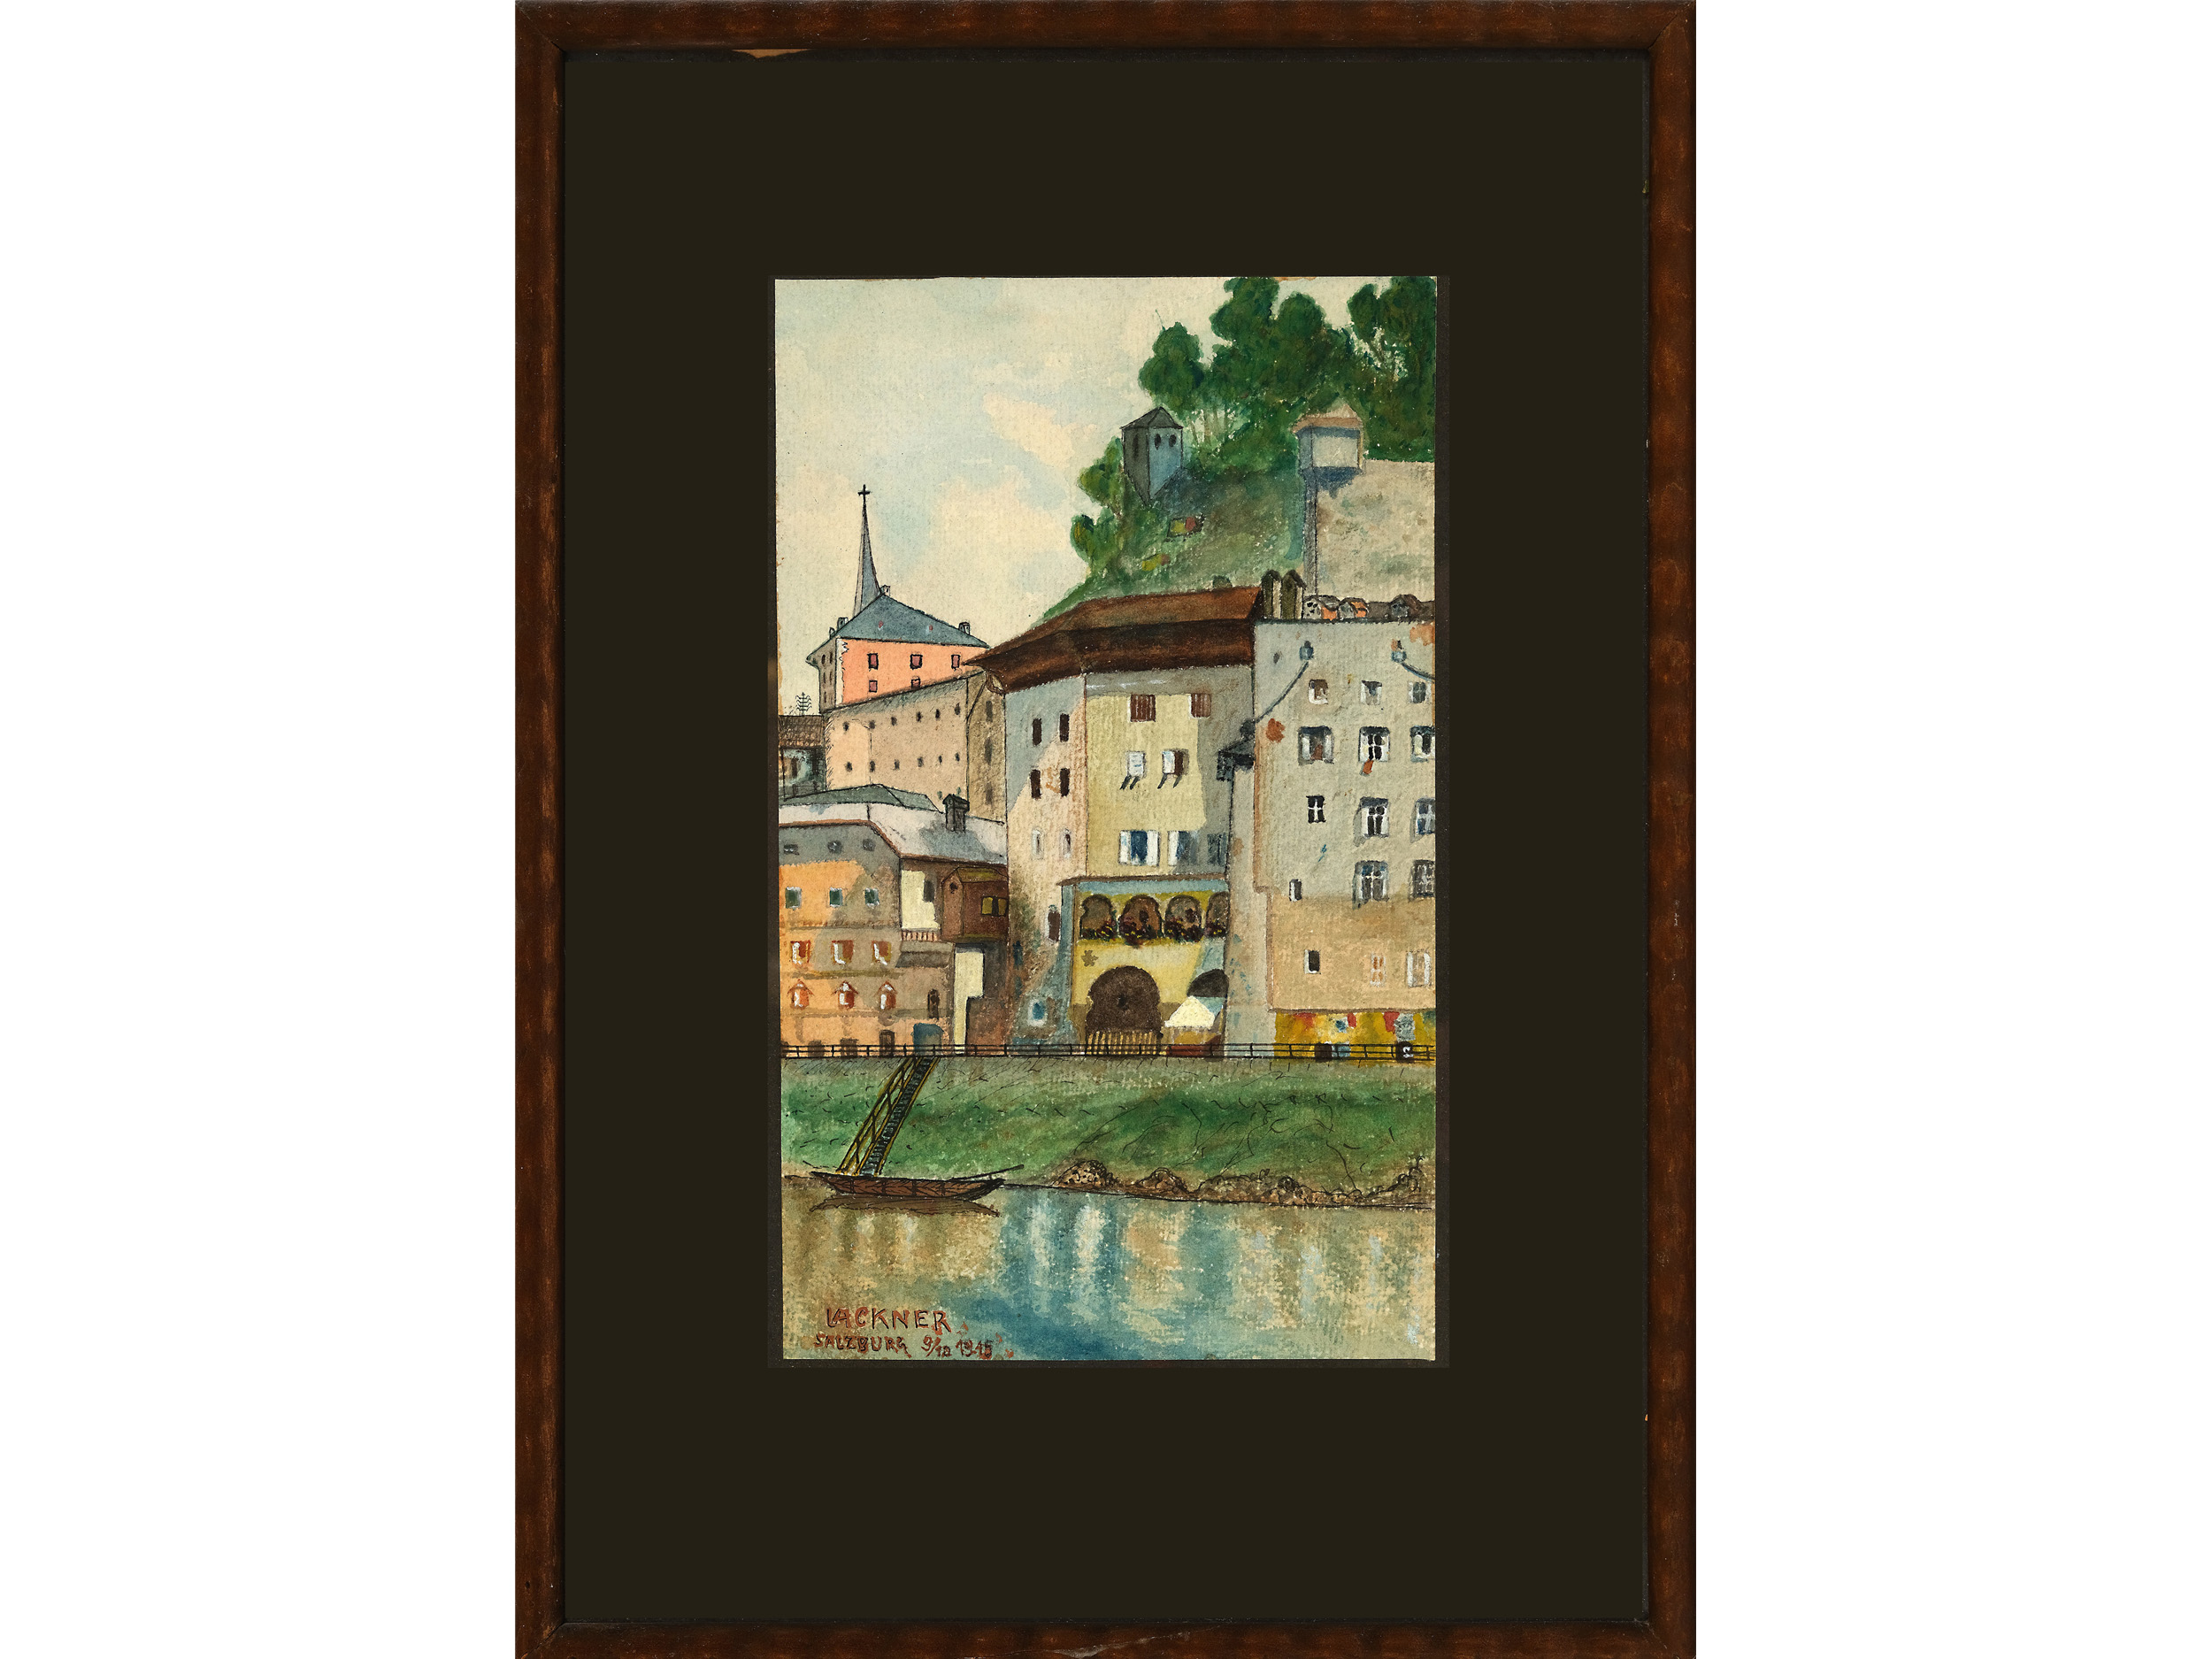 Unknown watercolourist, 19th/20th century, Motif from Salzburg - Image 2 of 4